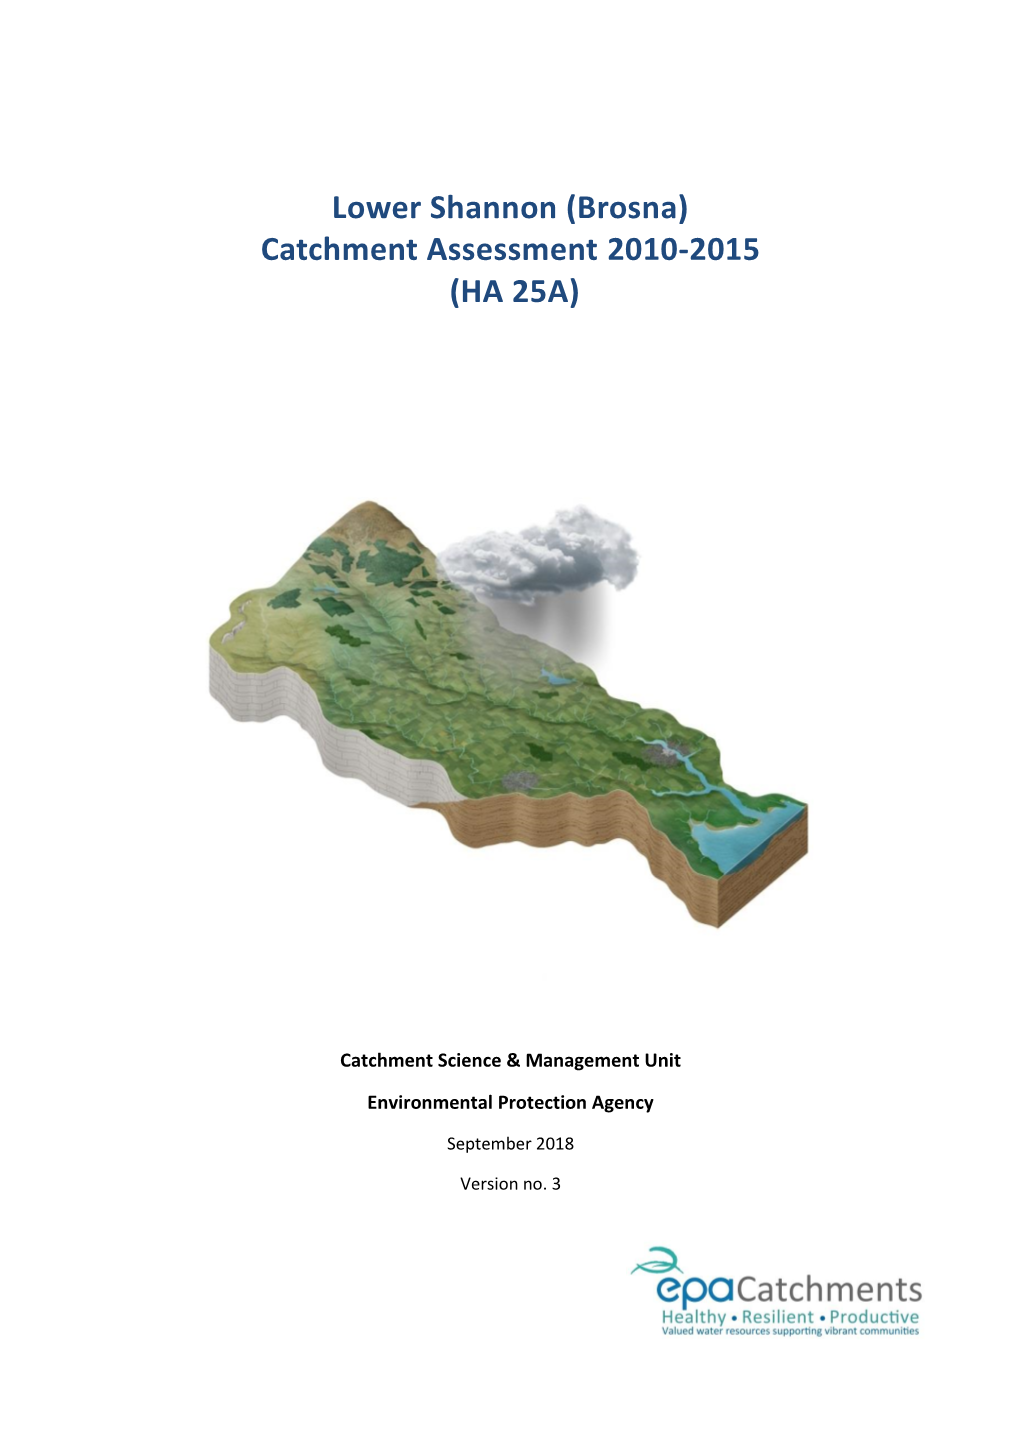 Lower Shannon (Brosna) Catchment Assessment 2010-2015 (HA 25A)